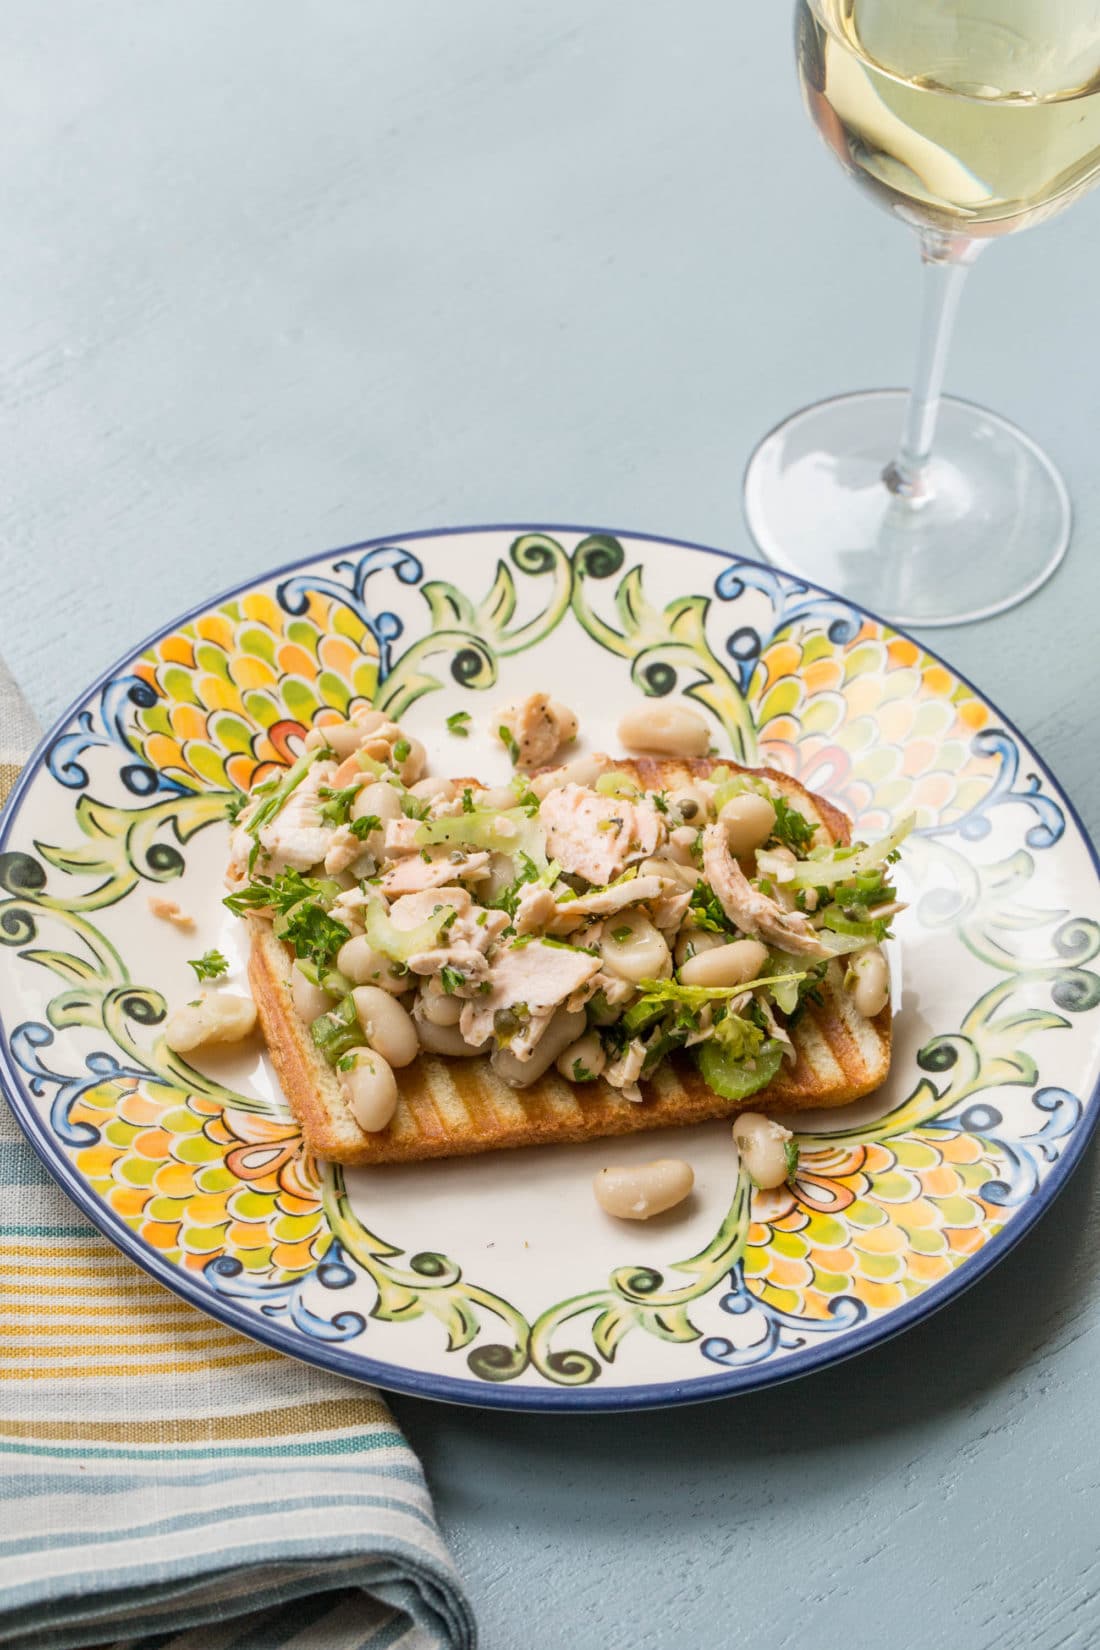 Salmon and White Bean Bruschetta on a colorful plate.